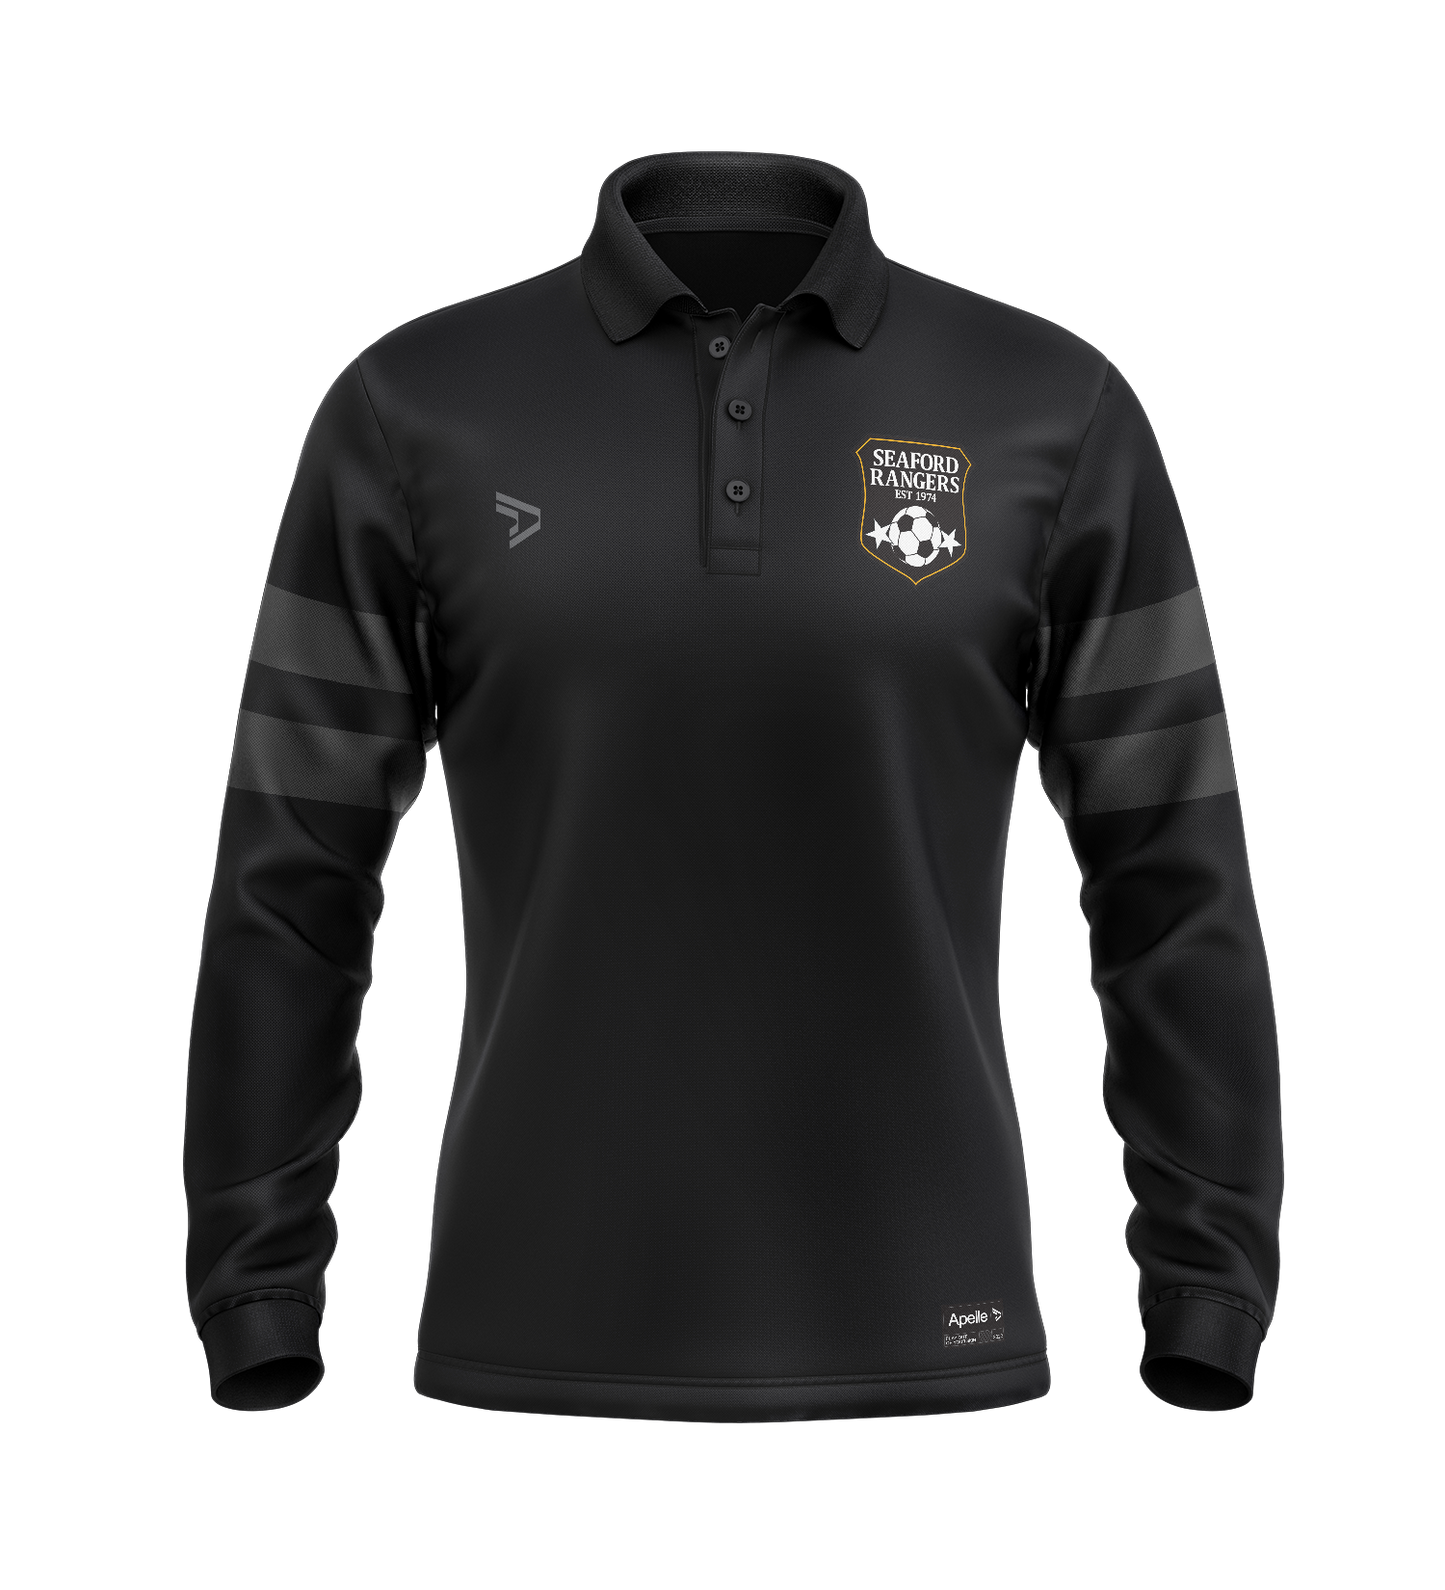 SEAFORD RANGERS RUGBY TOP